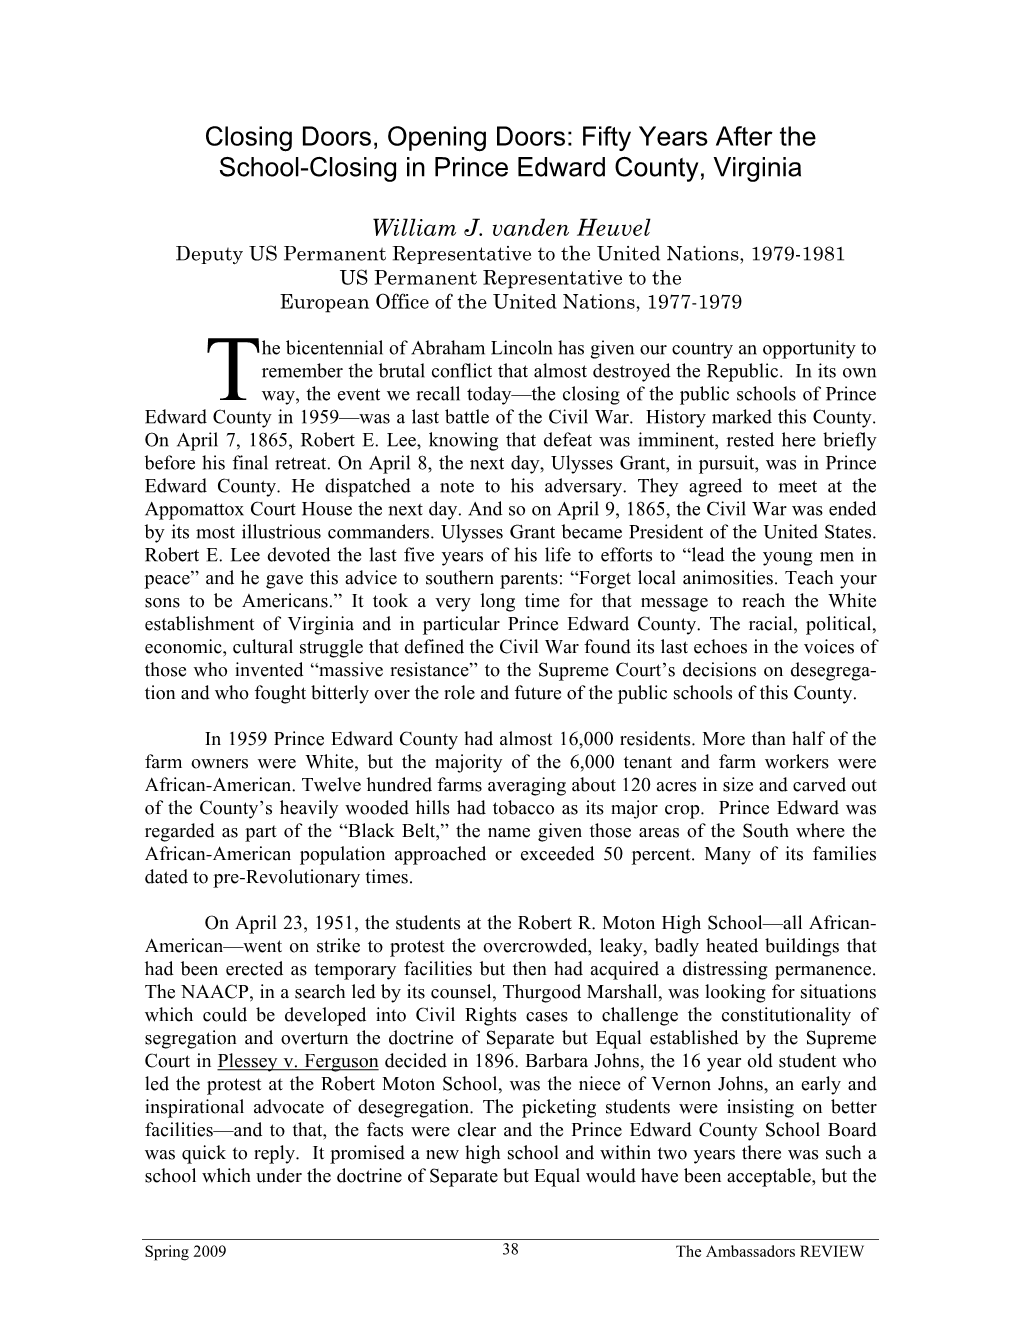 Closing Doors, Opening Doors: Fifty Years After the School-Closing in Prince Edward County, Virginia